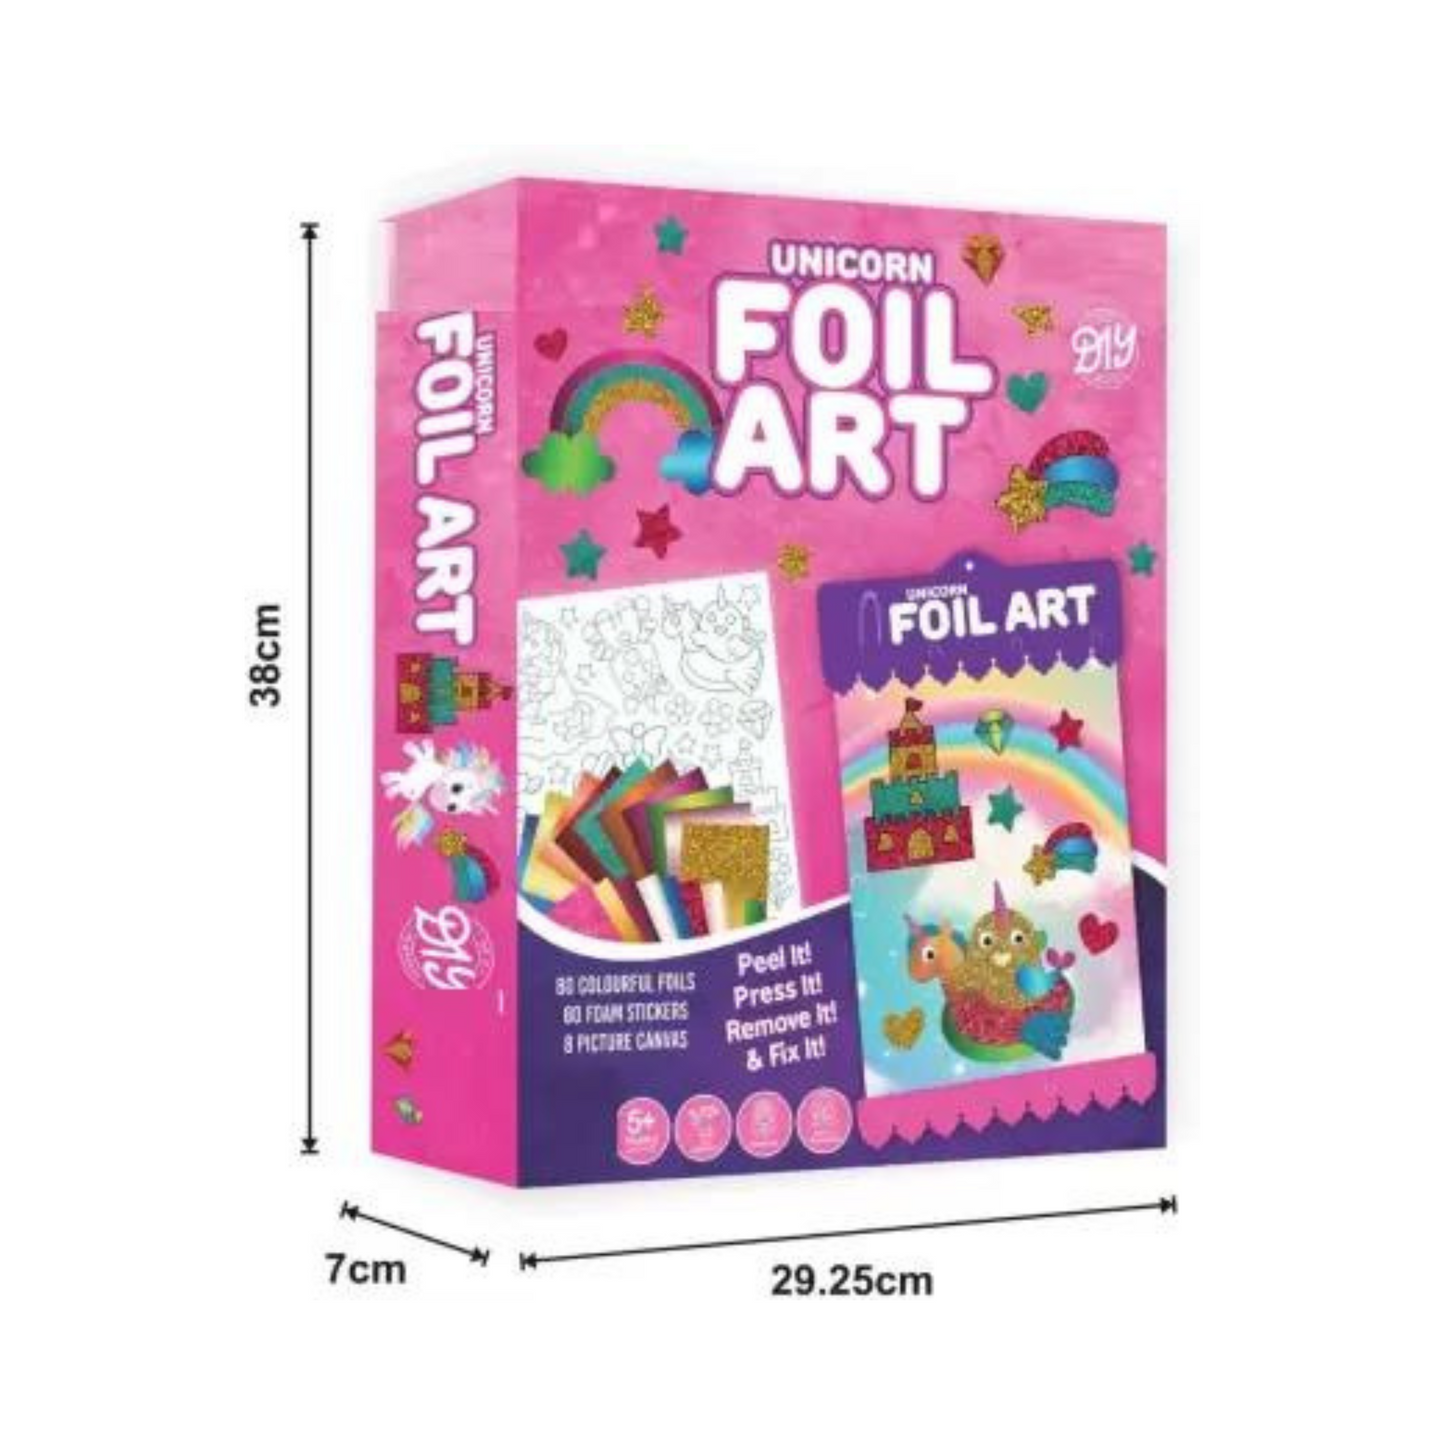  VHALE Foil Art Craft Kit 6 Pack Sticker Picture (9.5 x 6.5  inch), 48 Foil Sheets and 6 Skewers, Peel and Paste Sparkly Foil Art,  Classroom Arts and Crafts, Great Travel